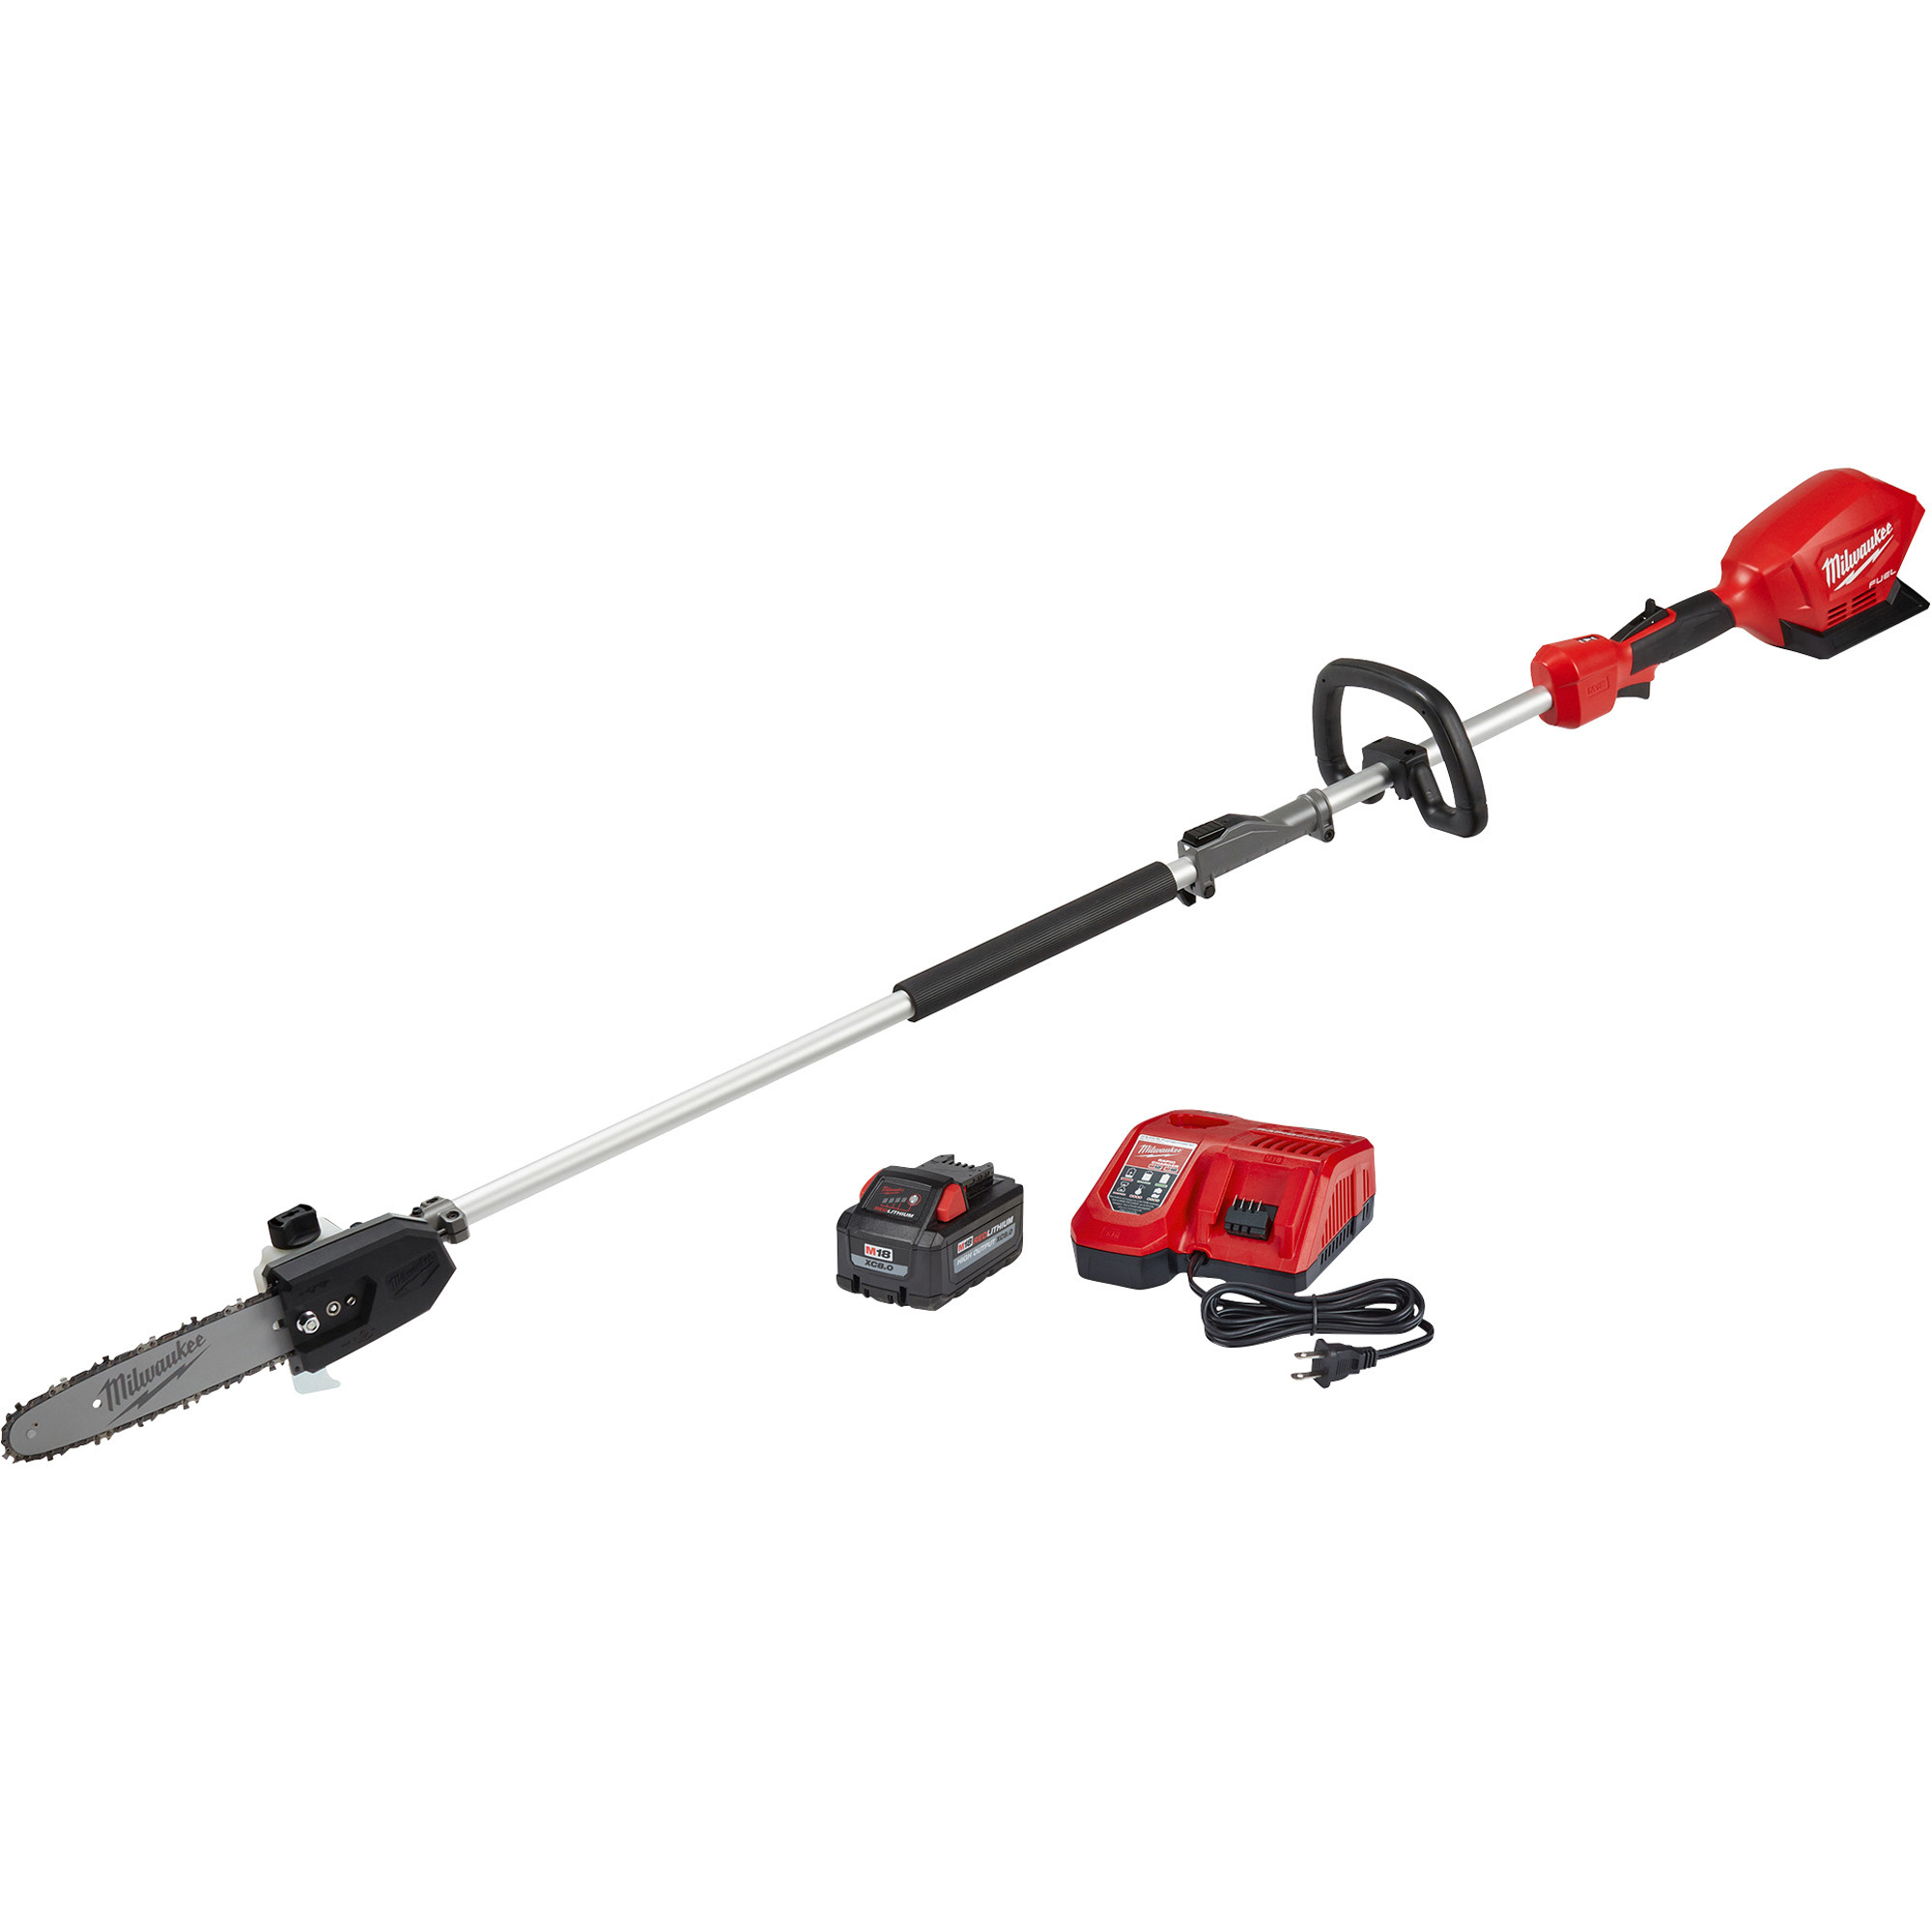 Milwaukee M18 Fuel Pole Saw Kit with QUIK-LOK, Complete 18V Lithium-Ion System, Model 2825-21PS